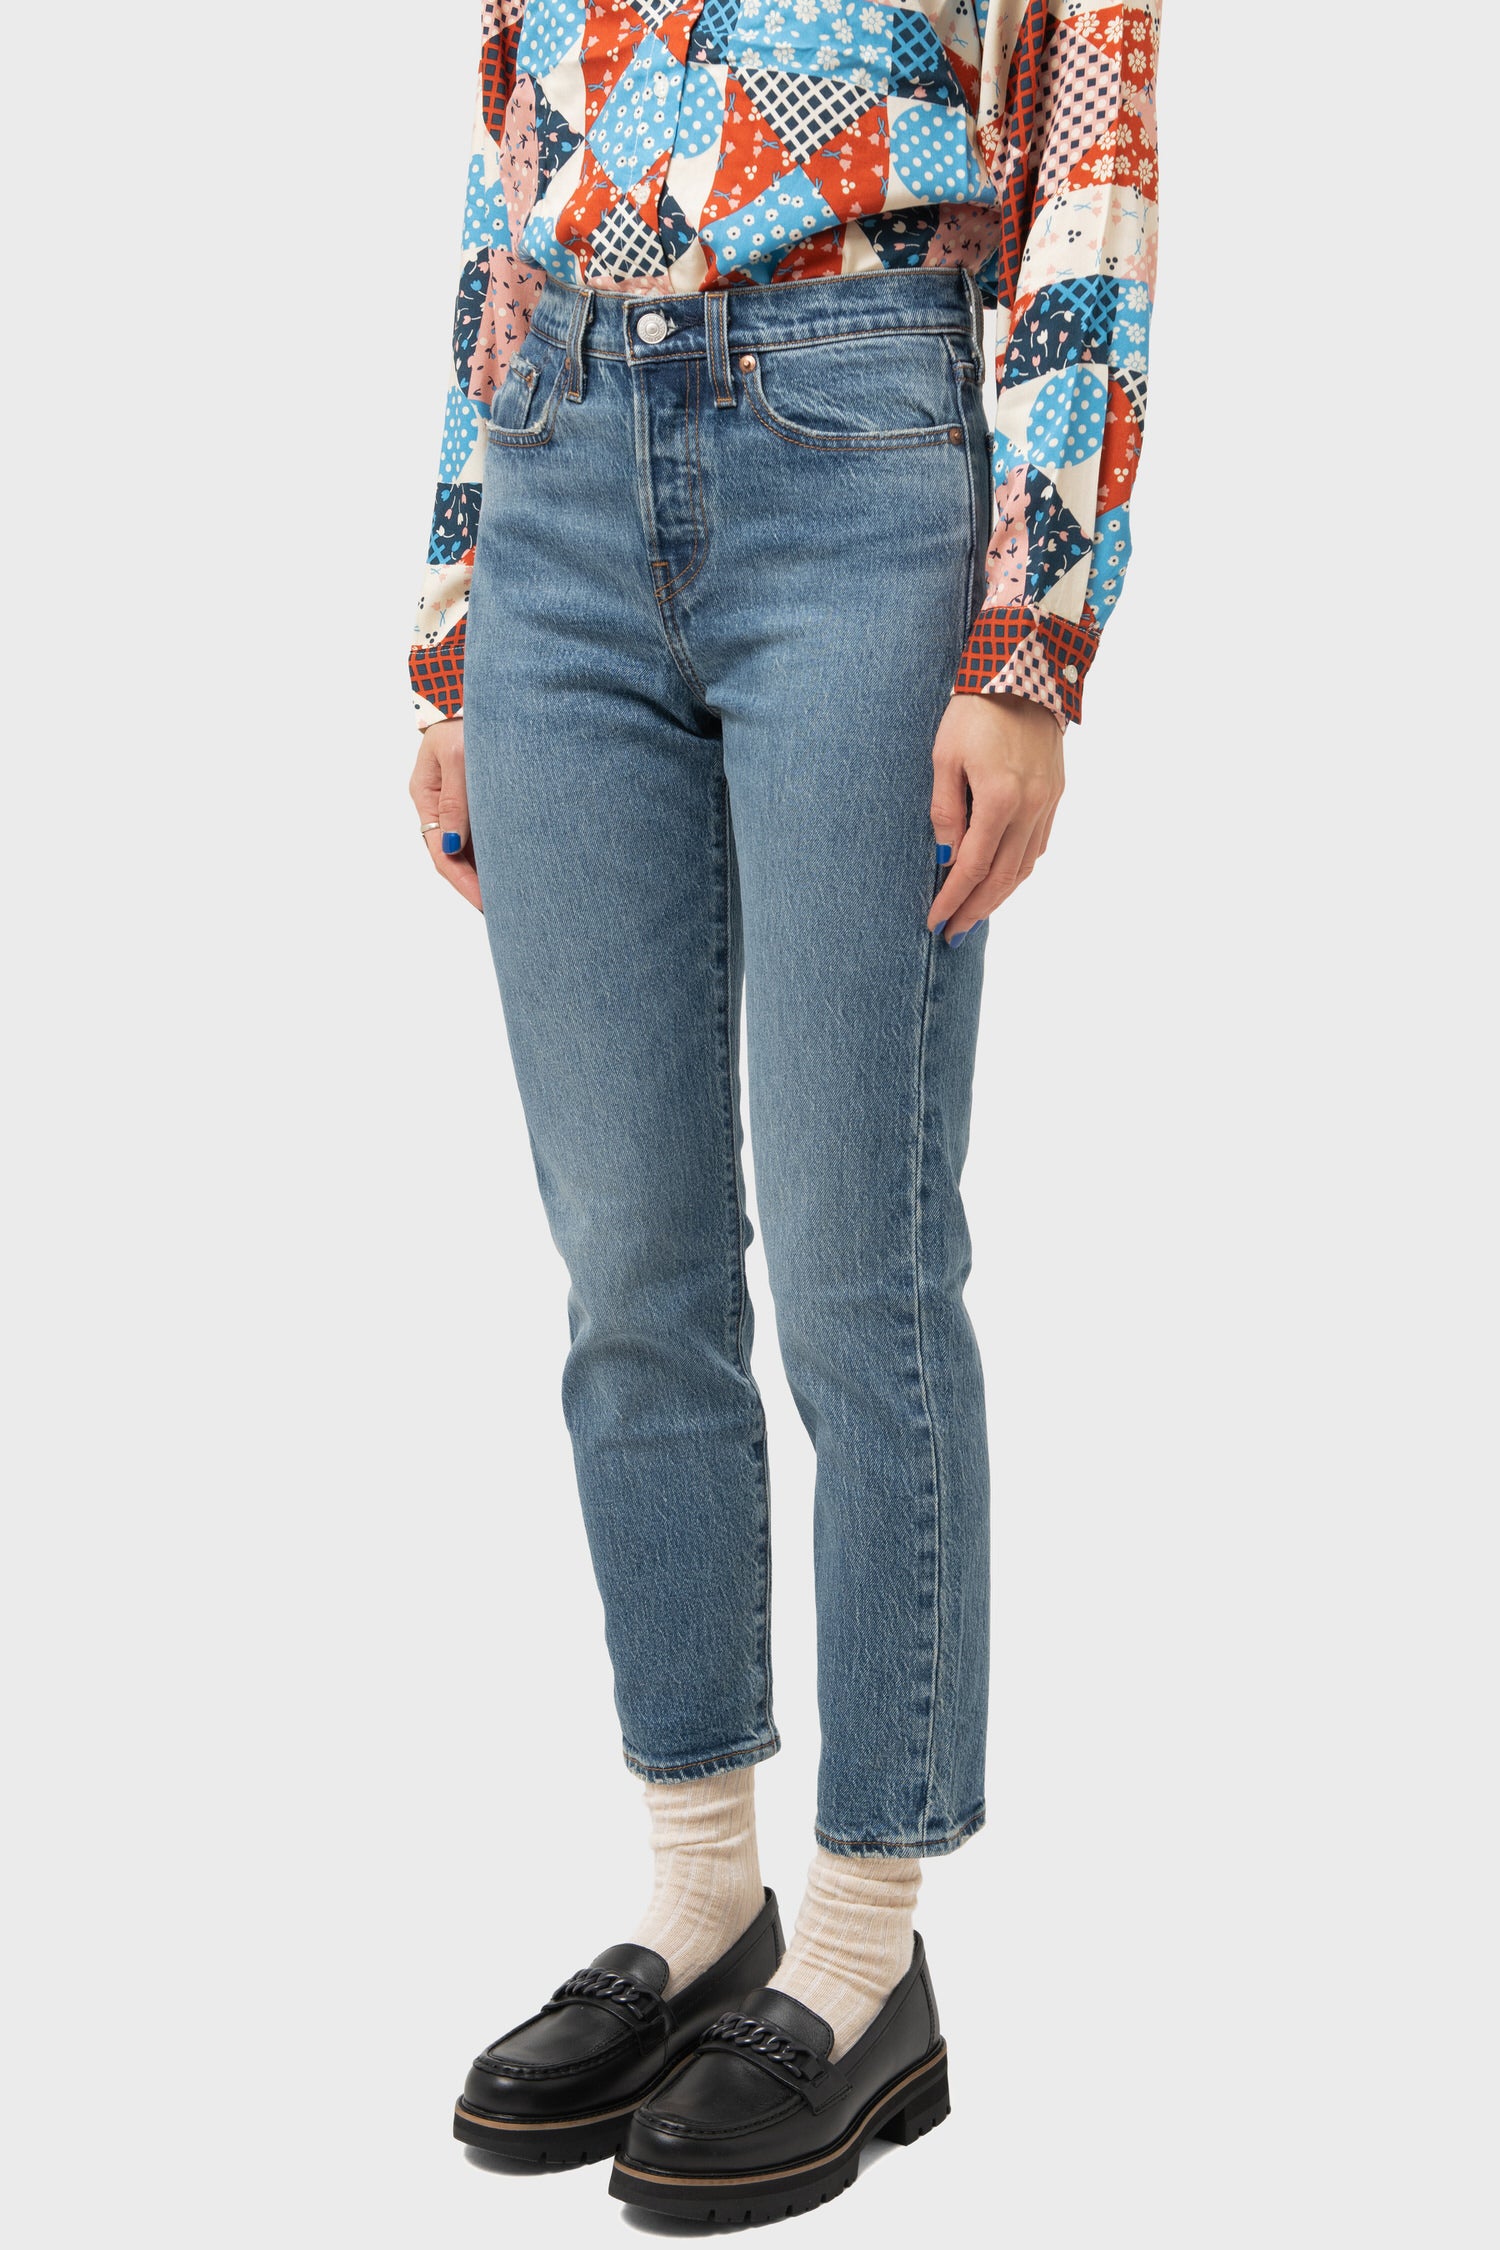 Women's Levi's Wedgie Icon Fit in These Dreams — Philistine